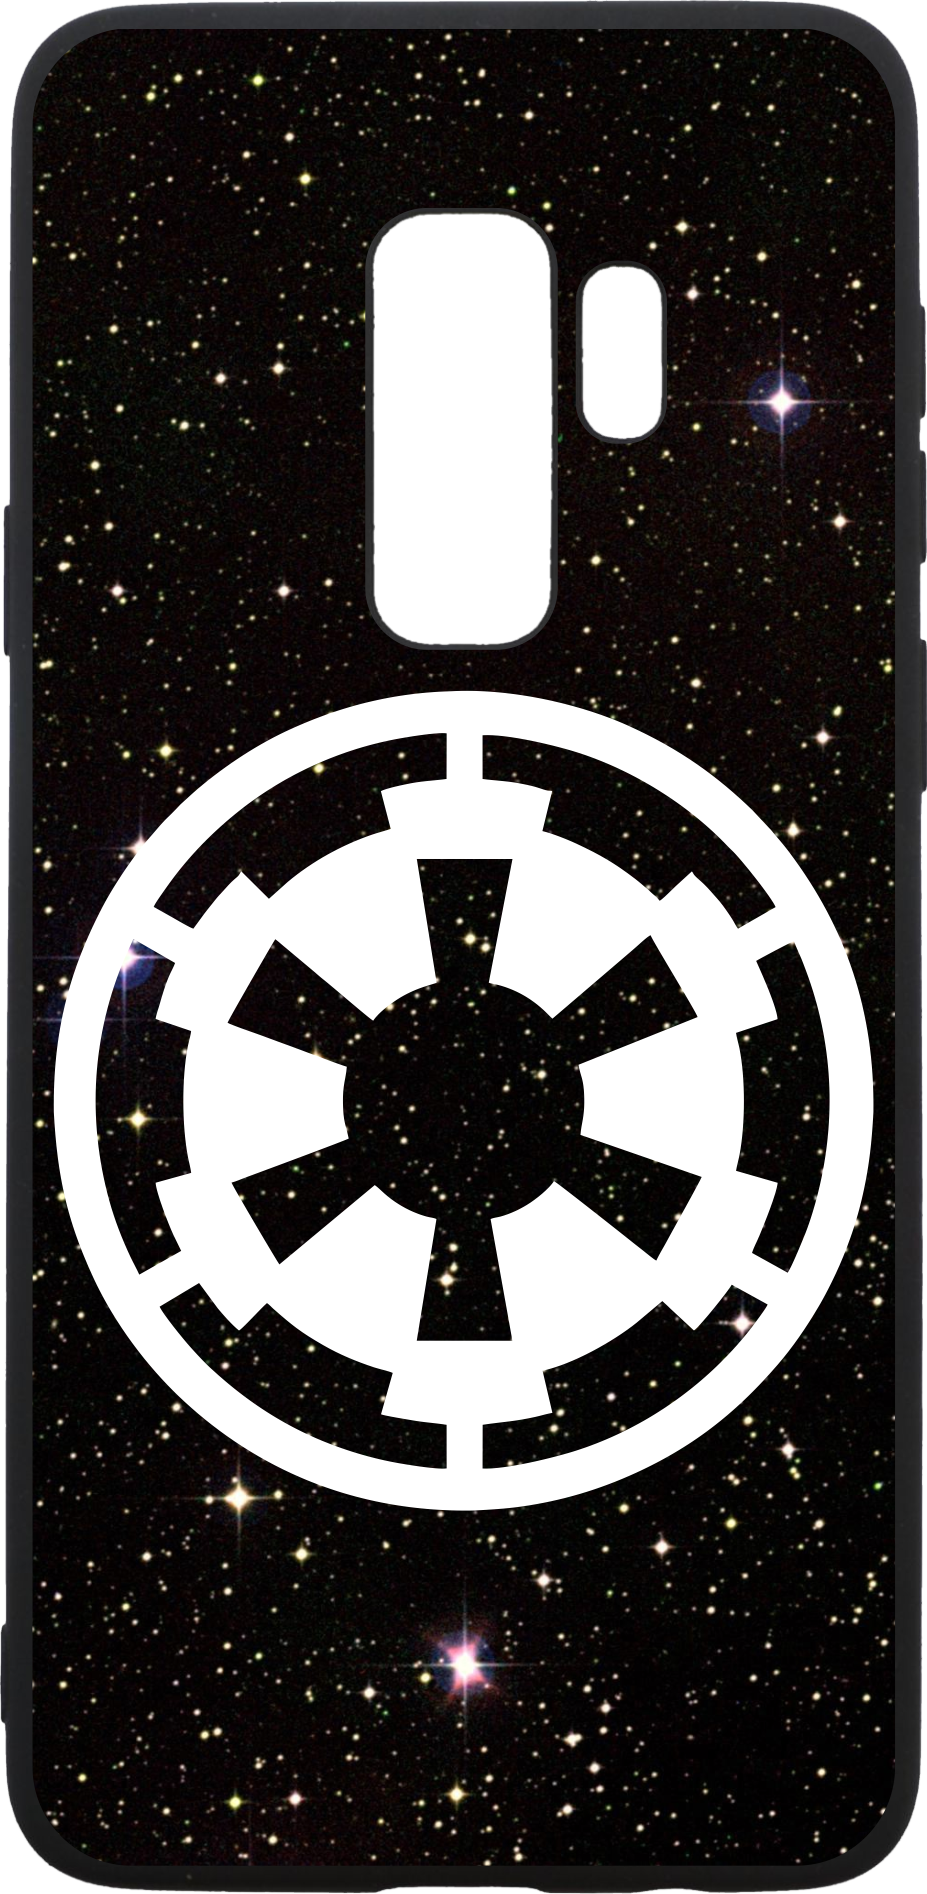 A Phone Case With A Star Wars Logo